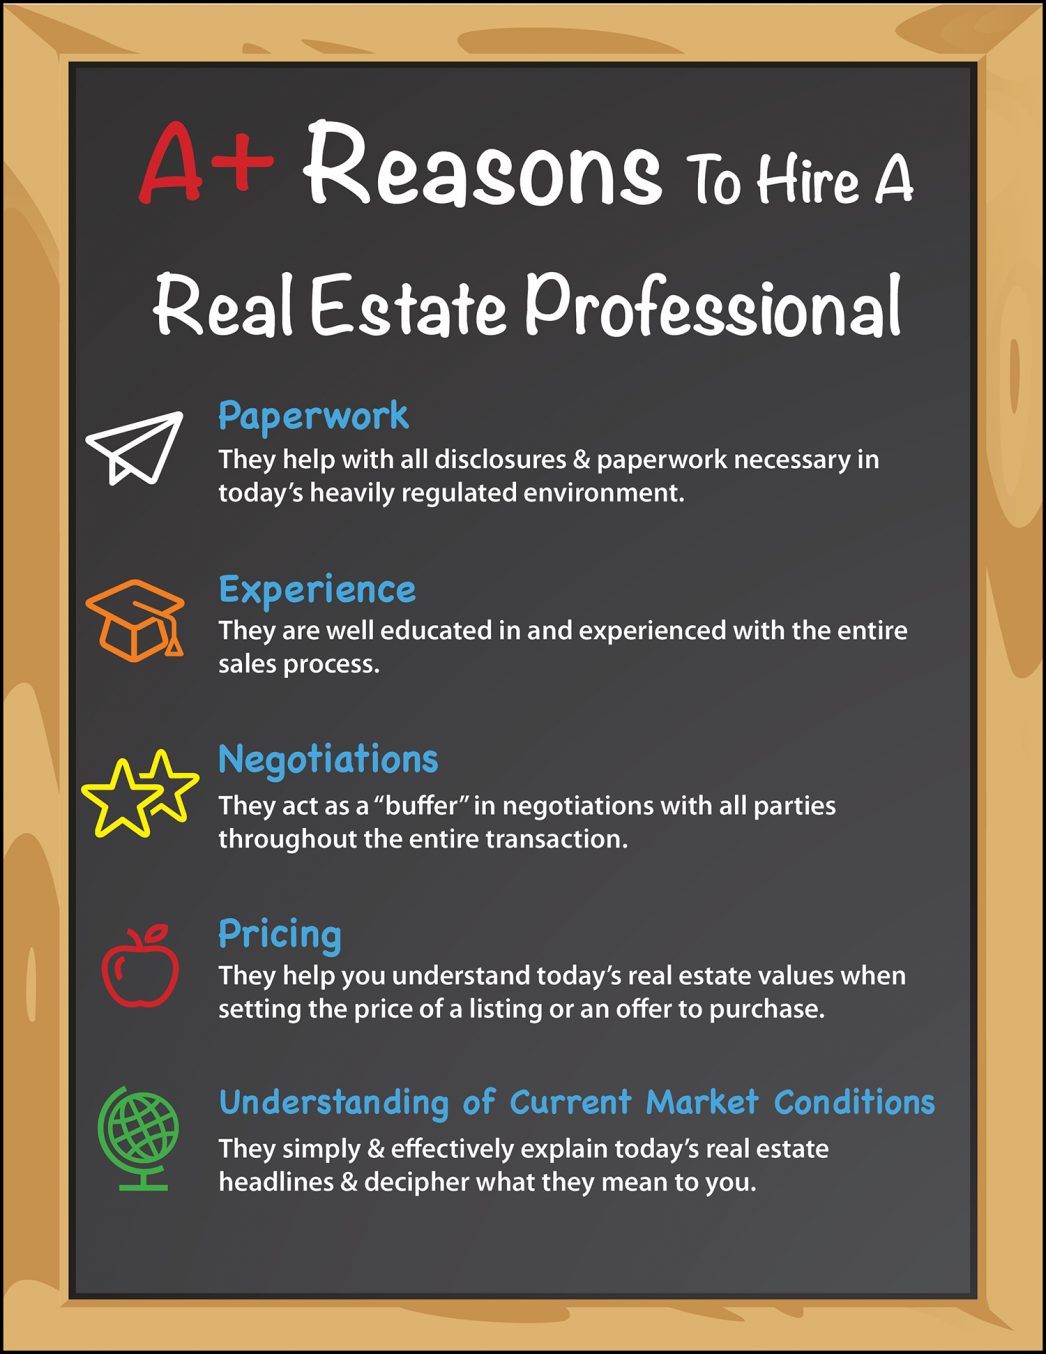 Top 5 A+ Reasons to Hire a Real Estate Pro [INFOGRAPHIC] | MyKCM